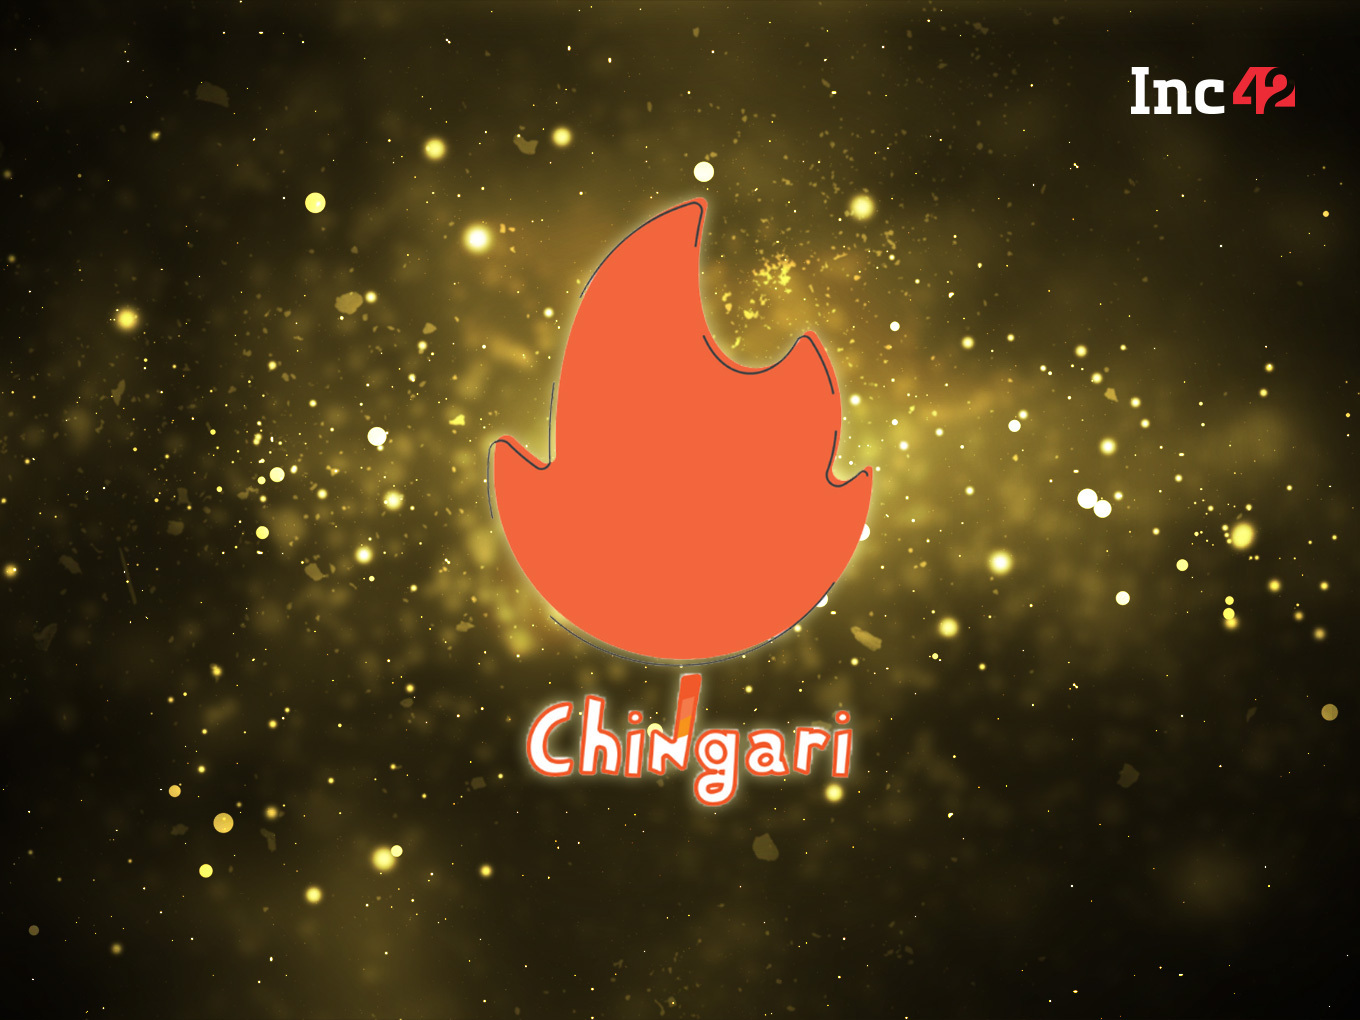 Chingari Bets On Cloning TikTok And India’s Nationalist Sentiment To Drive Its Growth